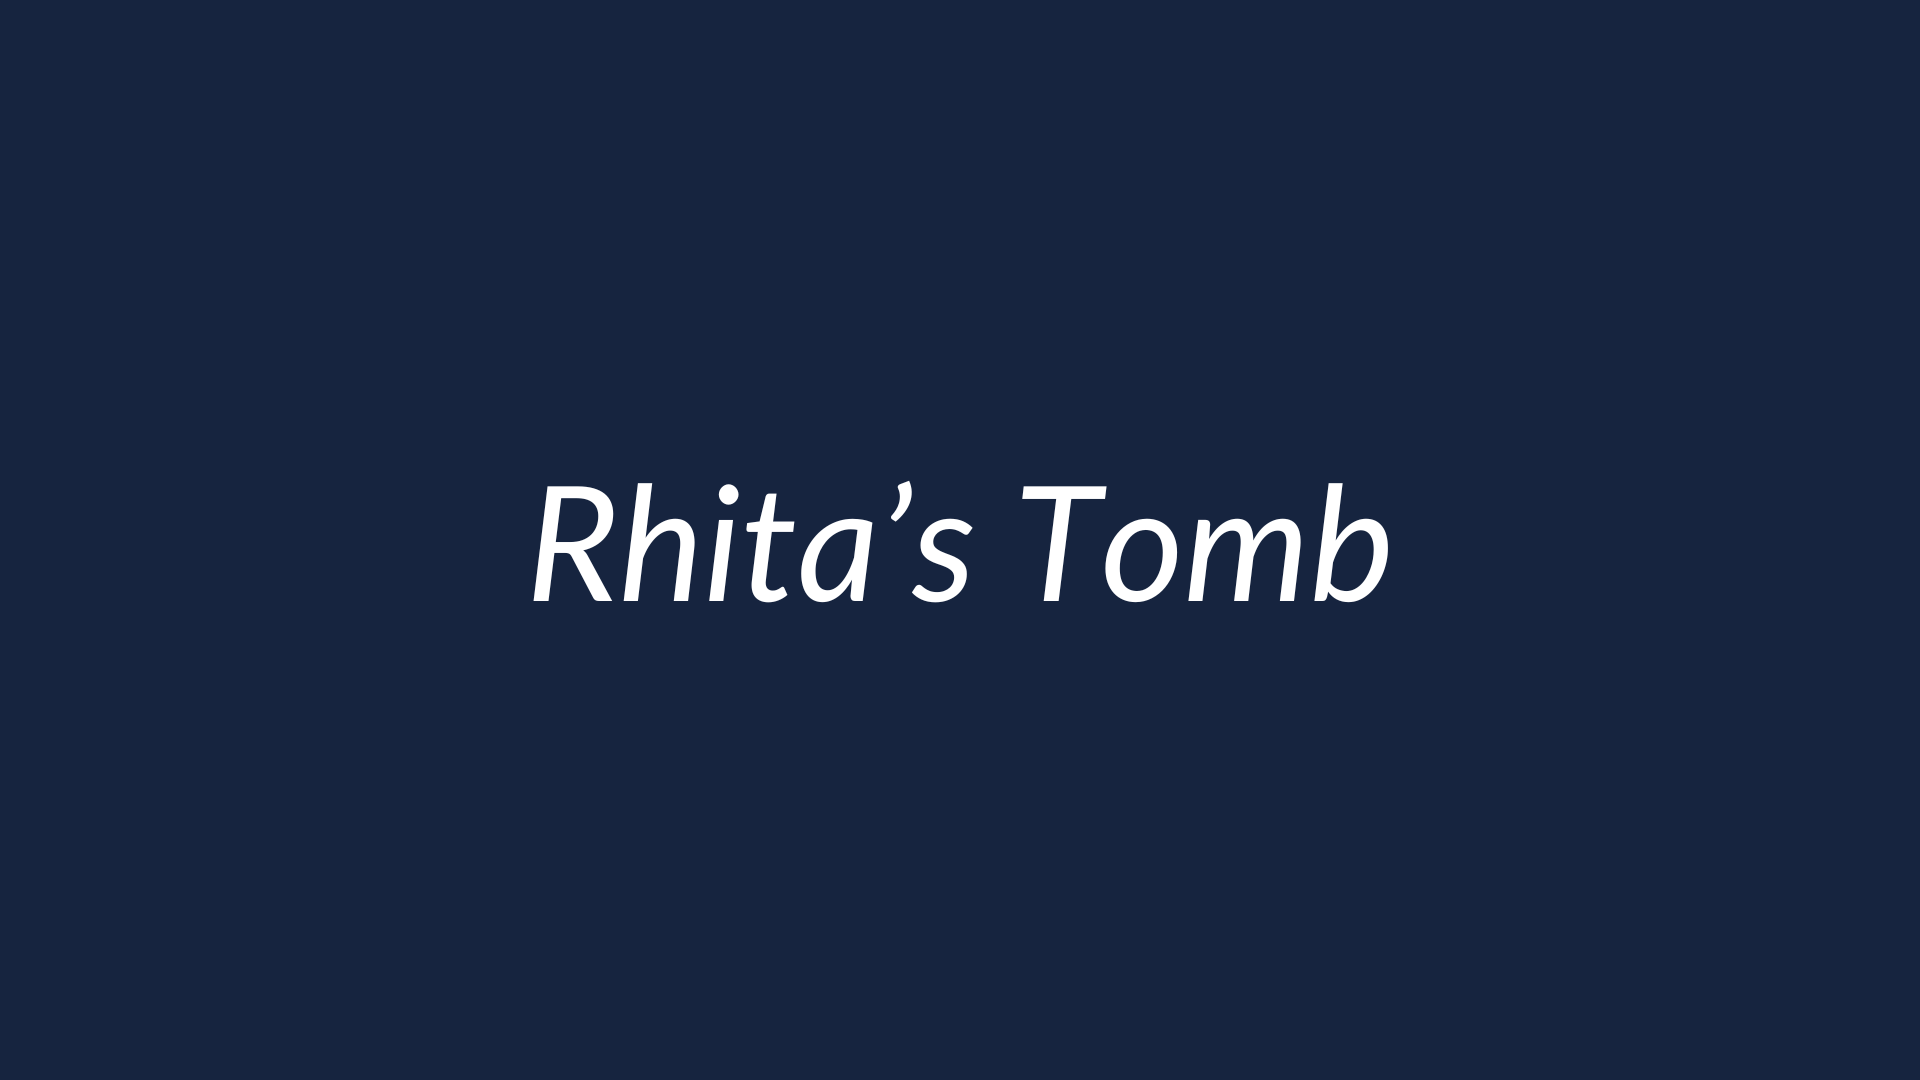 Graphic with white text on blue background saying 'Rhita's Tomb'.